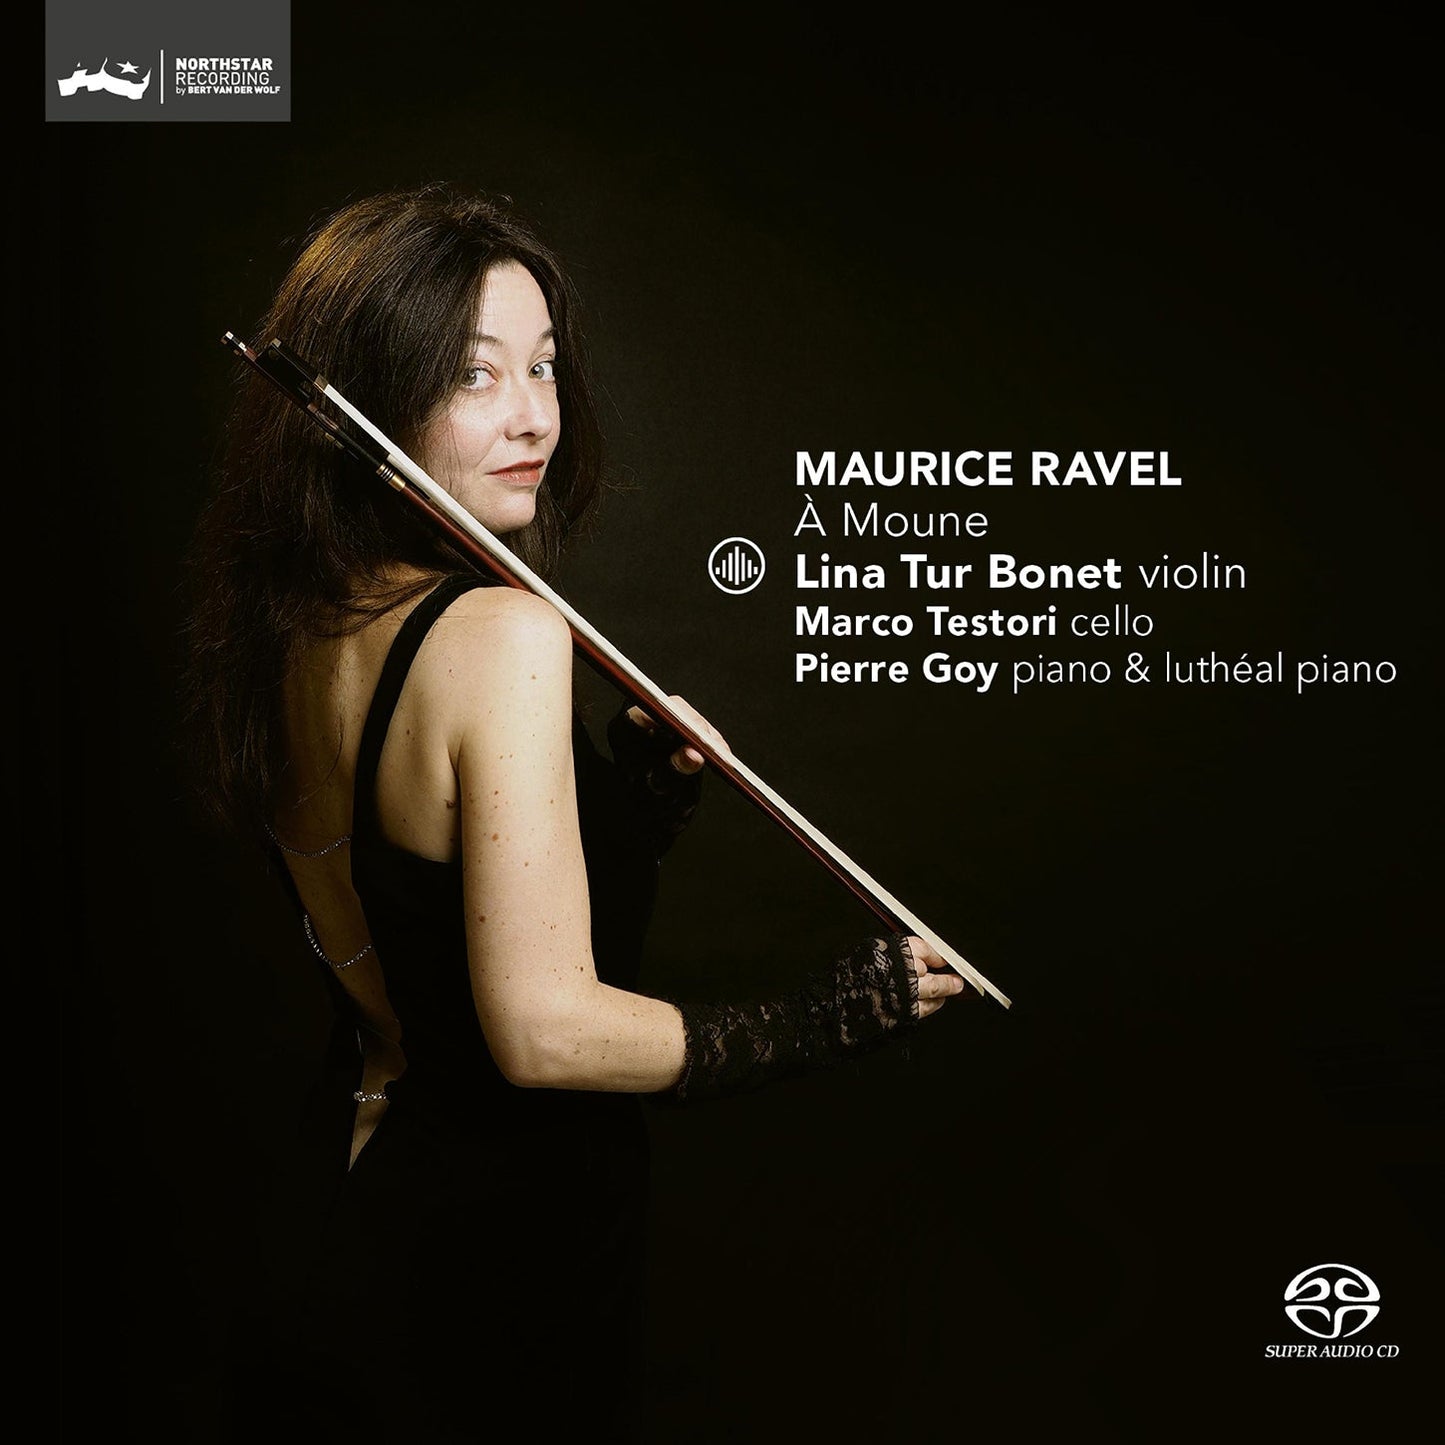 Ravel: A Moune – Chamber Music With Violin